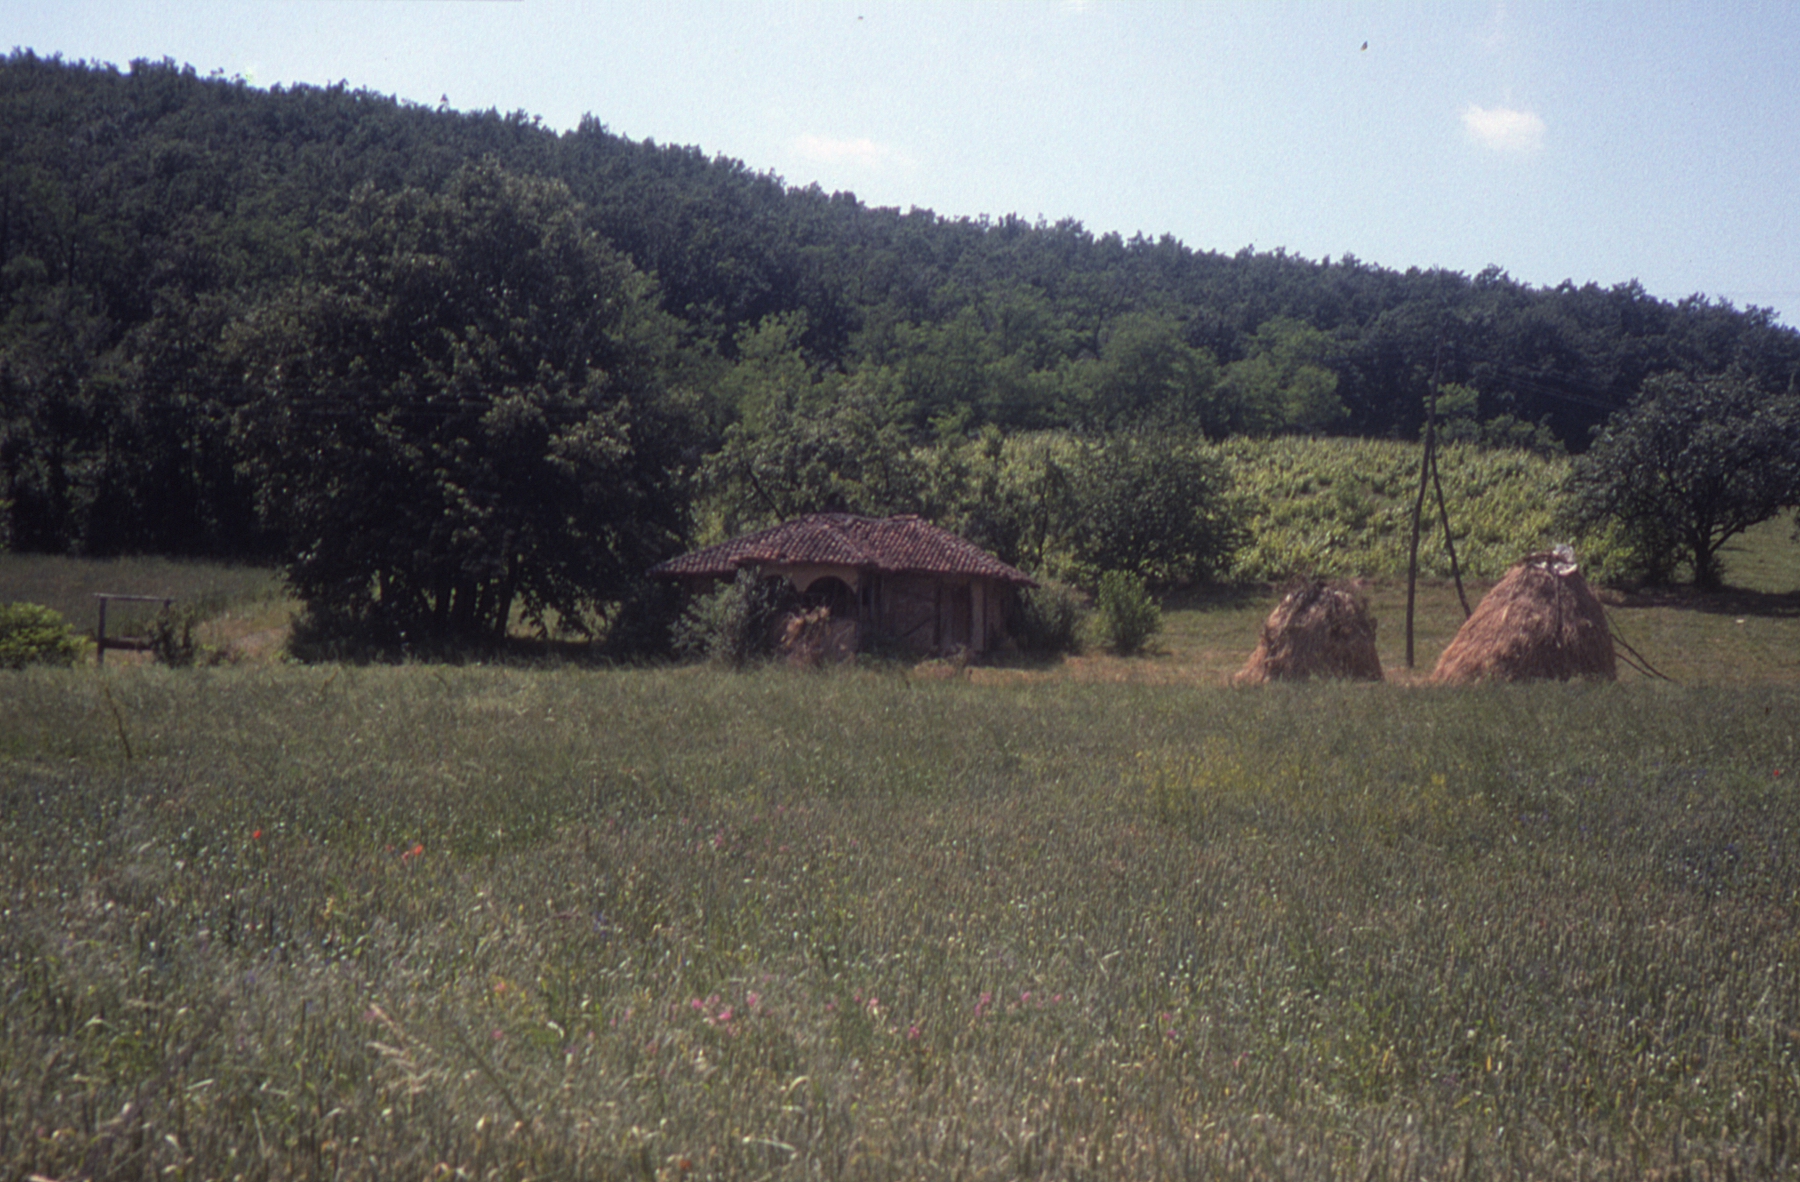 <p>North of village of Vratarnica, close to the larger town of Grljan, are fields and pastures that still contain small single story dwellings constructed using bondruk.</p><p><br></p><p>This dwelling contains a protecting porch element that is made of wood frame with walls infilled with wattle and daub and the characteristic arched openings. The planted fields and haystacks show that work still occurs and the simple structure has some continuing use.</p>